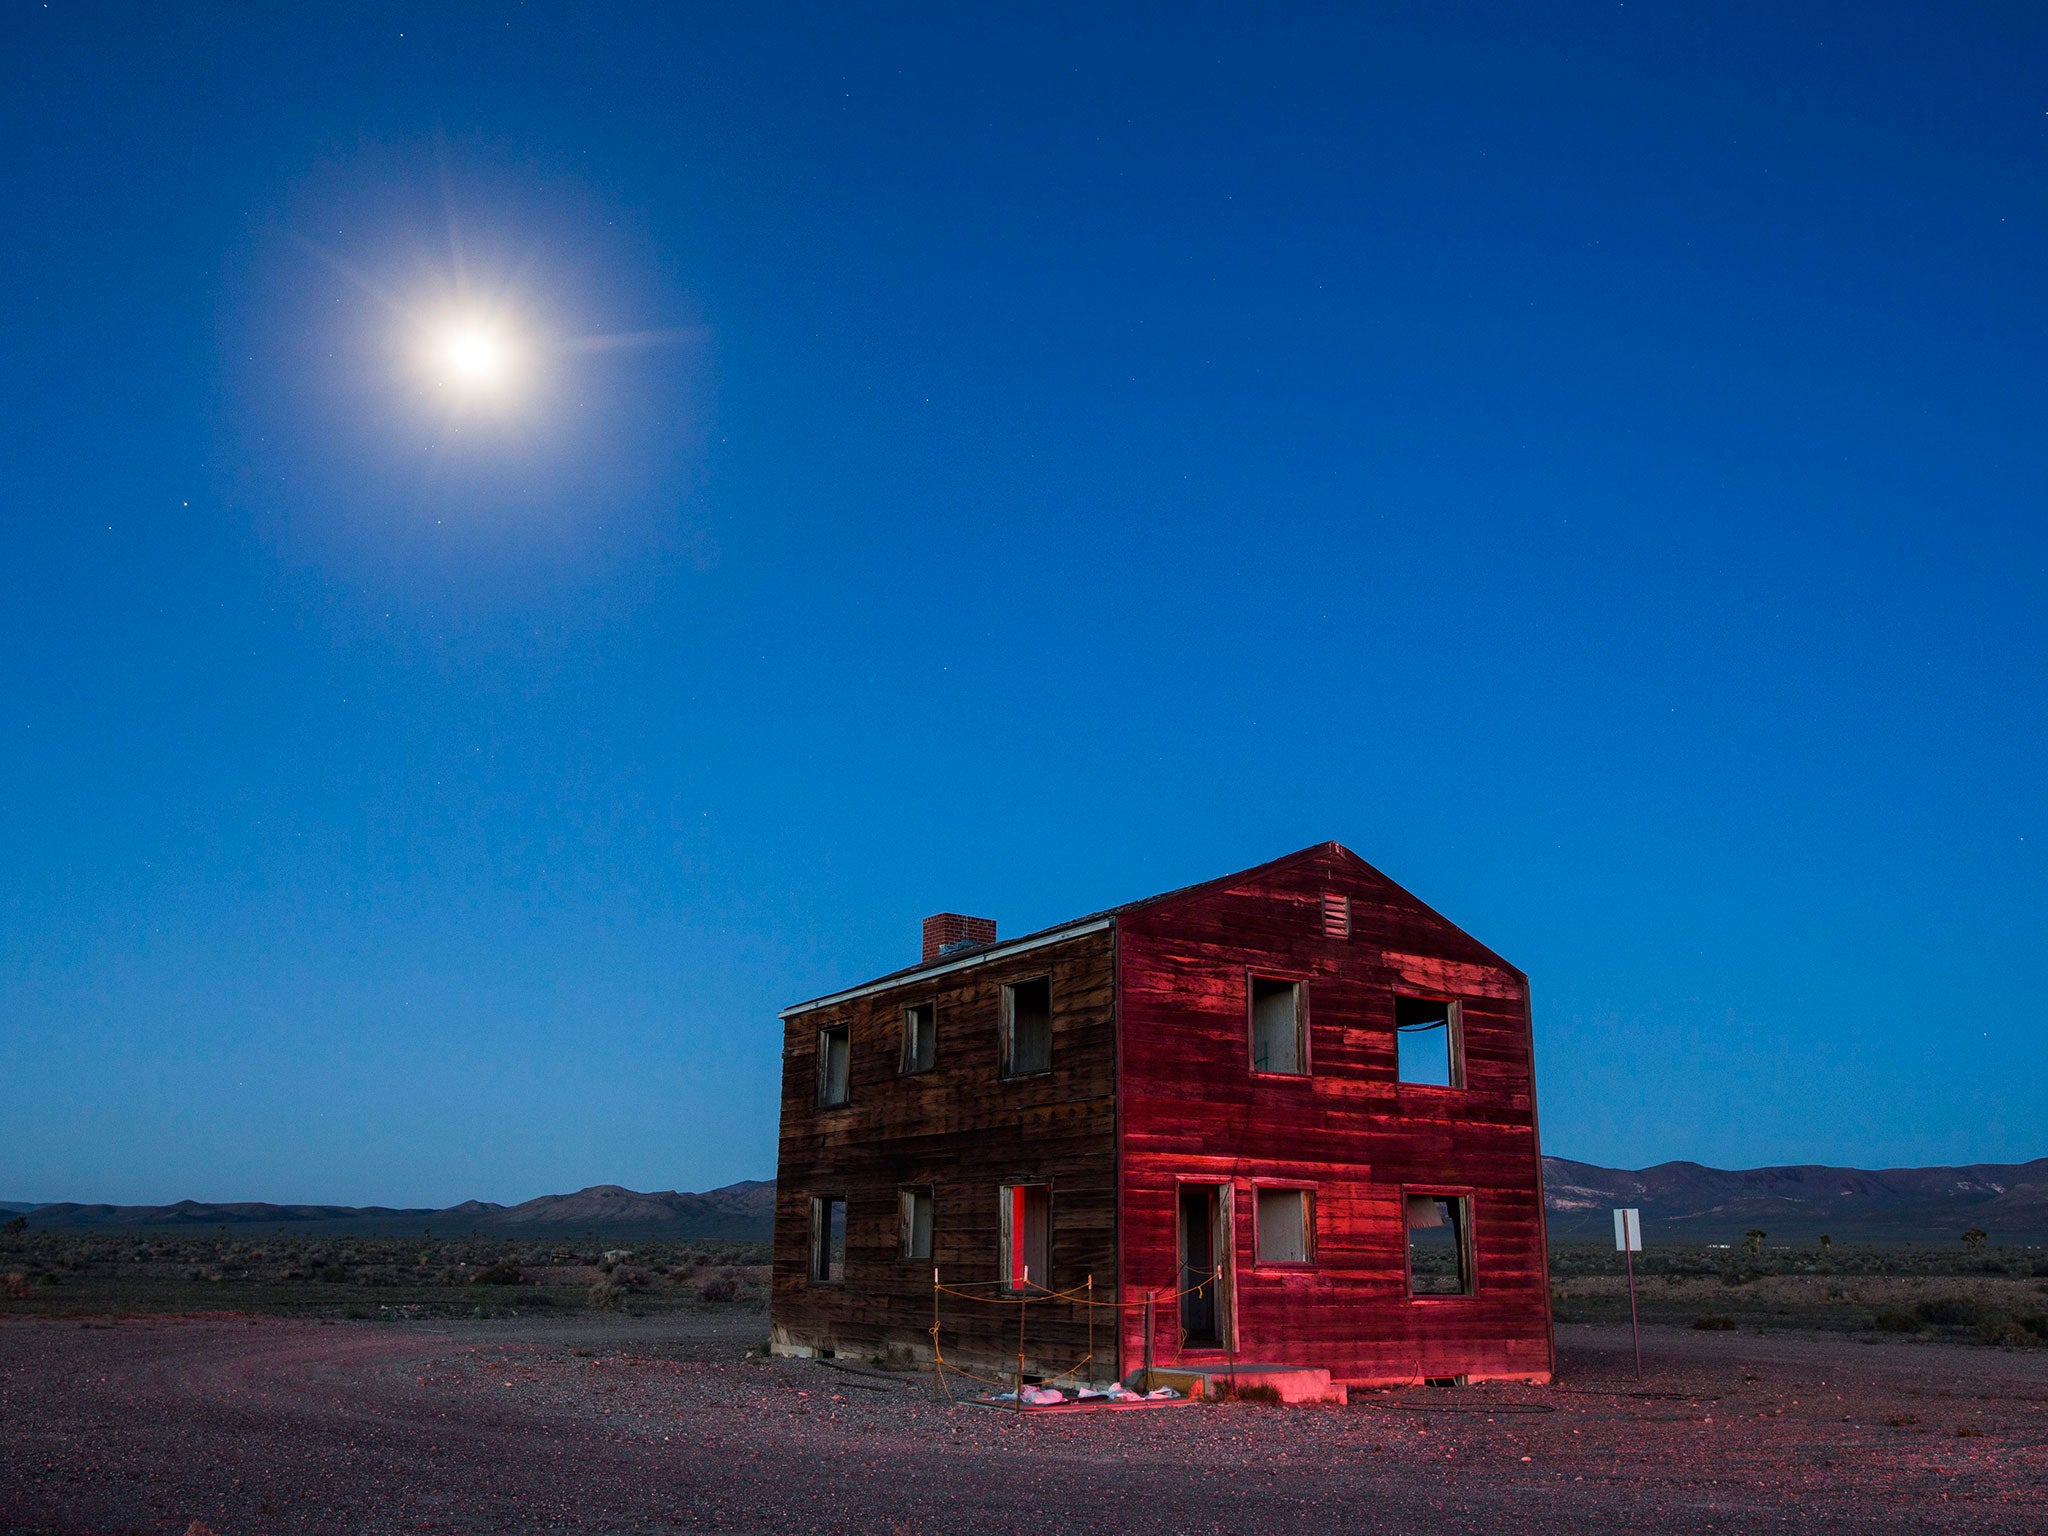 The so-called 'Apple-2 House' is one of two homes that remain from Doomtown's fake American community that included cars, furniture, and mannequins, 100 miles (160 kilometers) northwest of Las Vegas, Nevada